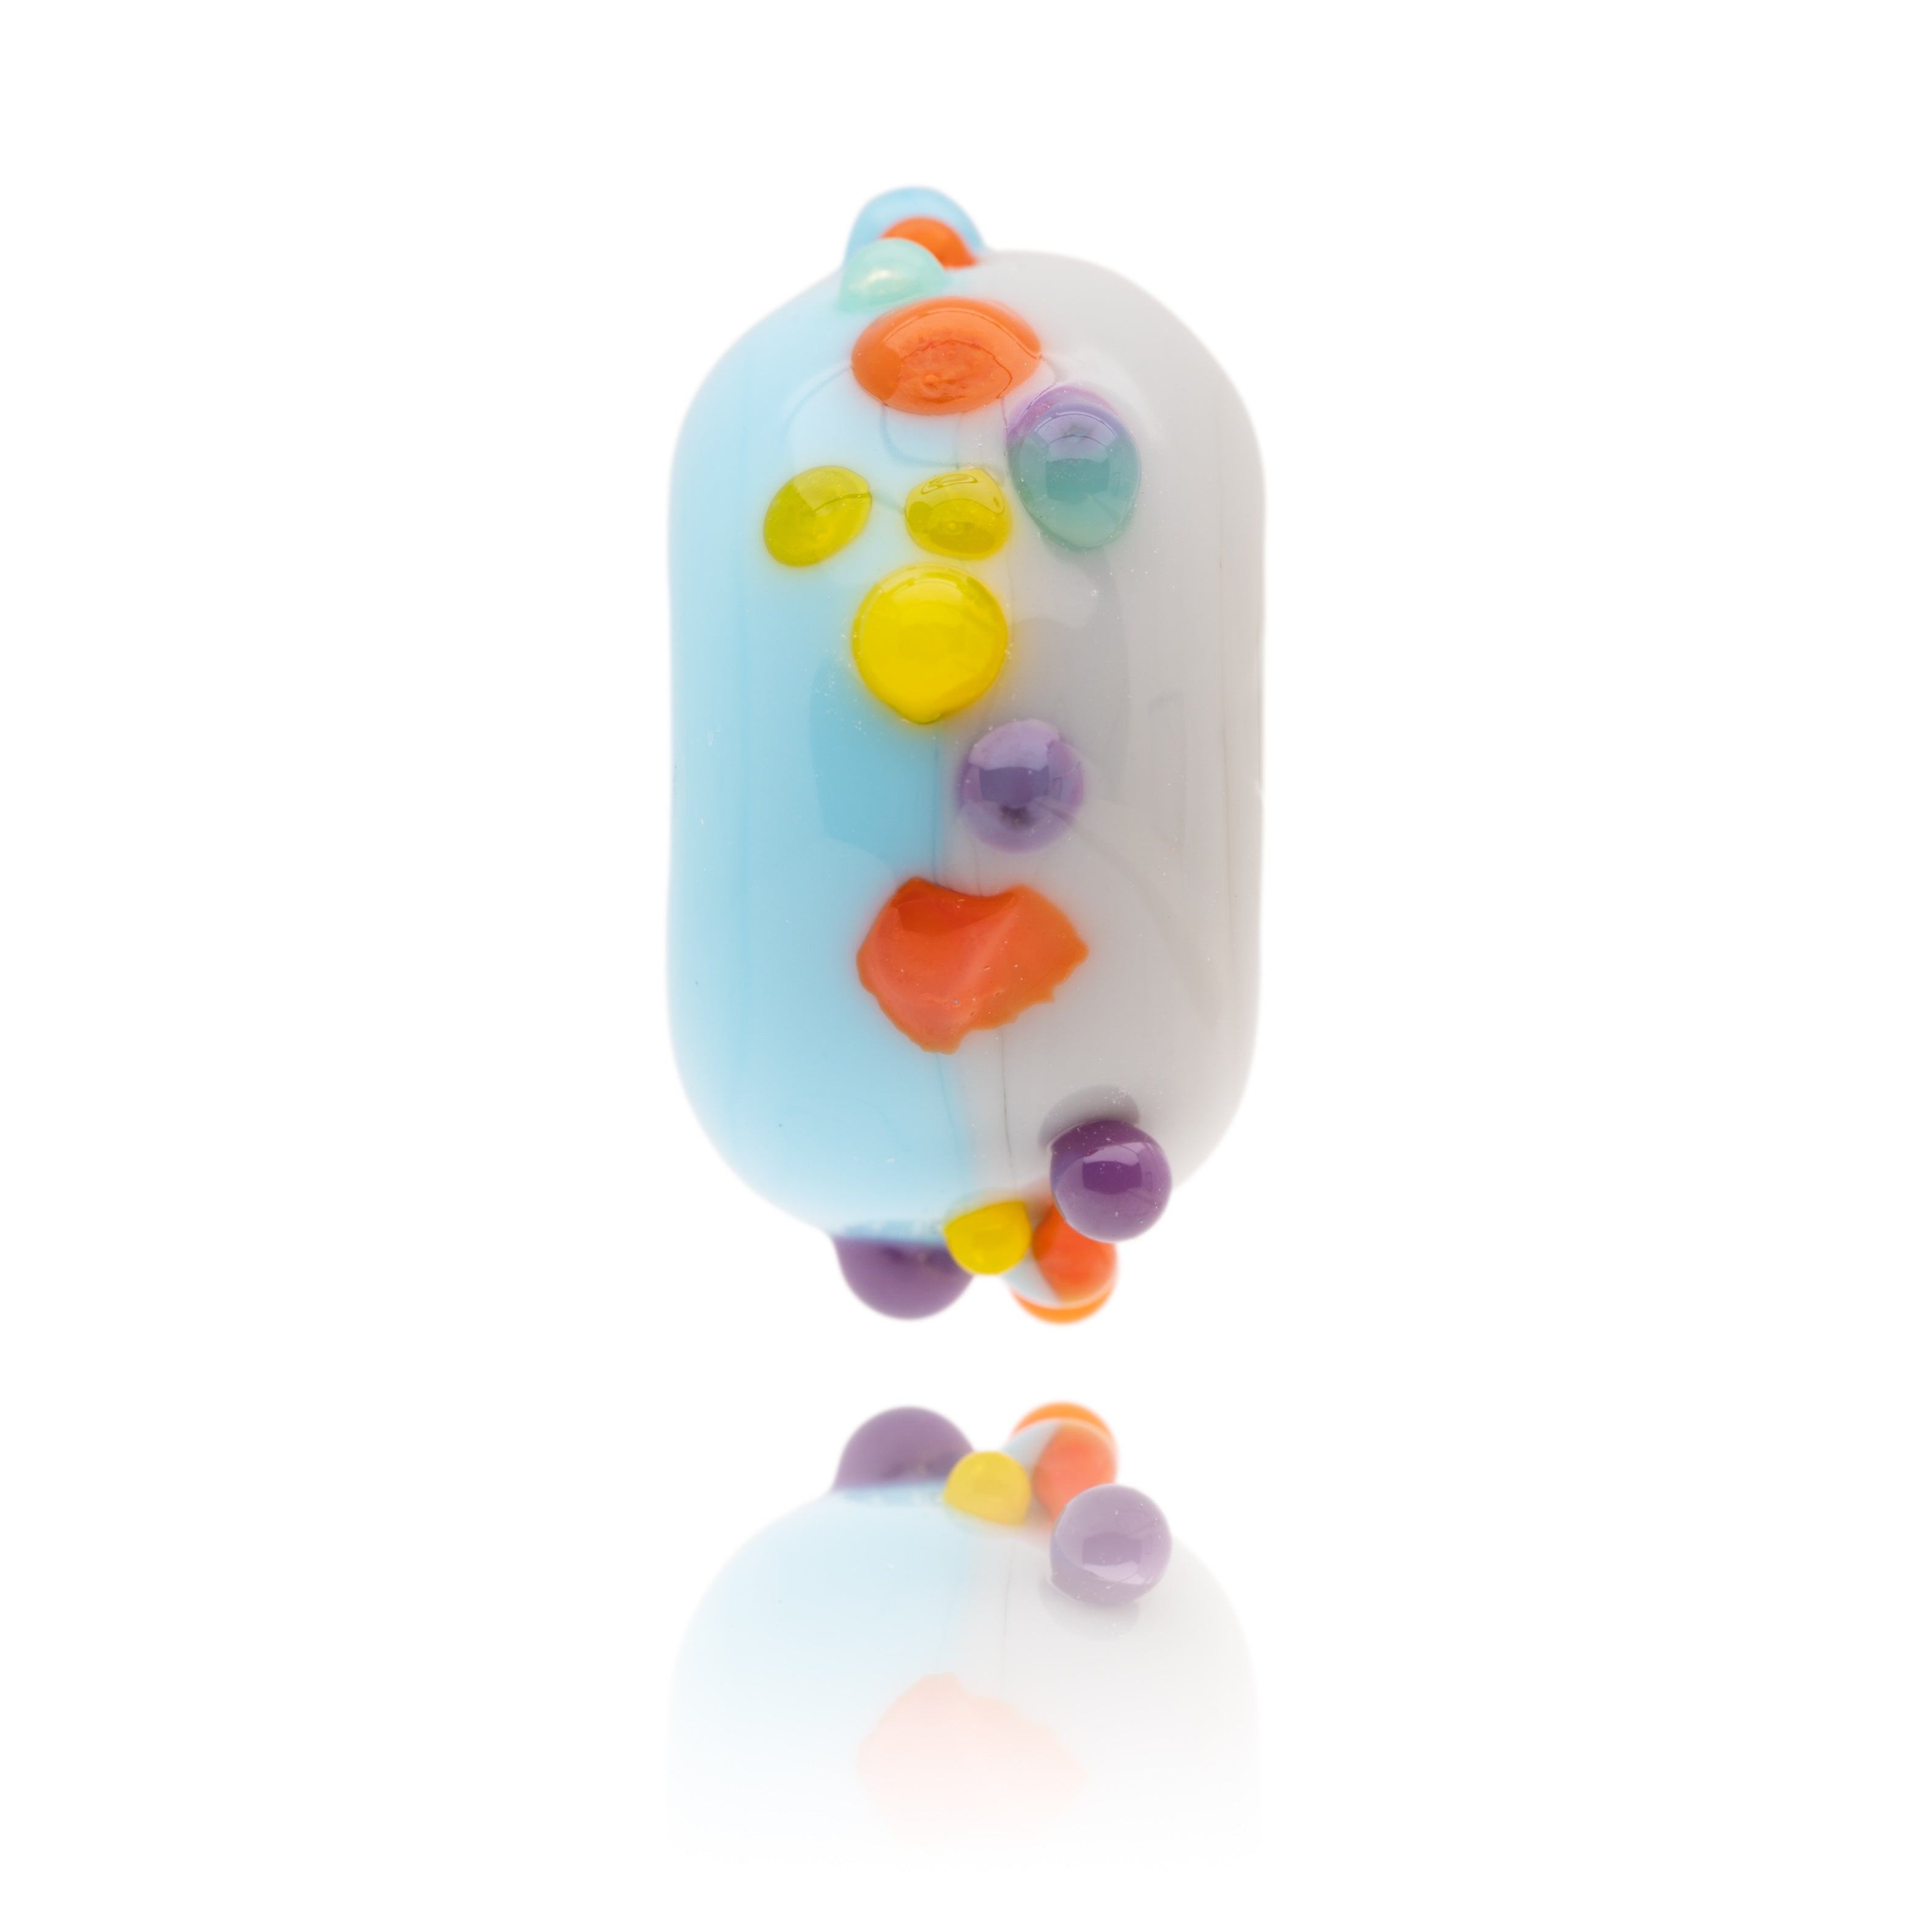 Blue and grey glass bead with orange, yellow, green and purple dots around the middle. Representing Hove Beach in Sussex.